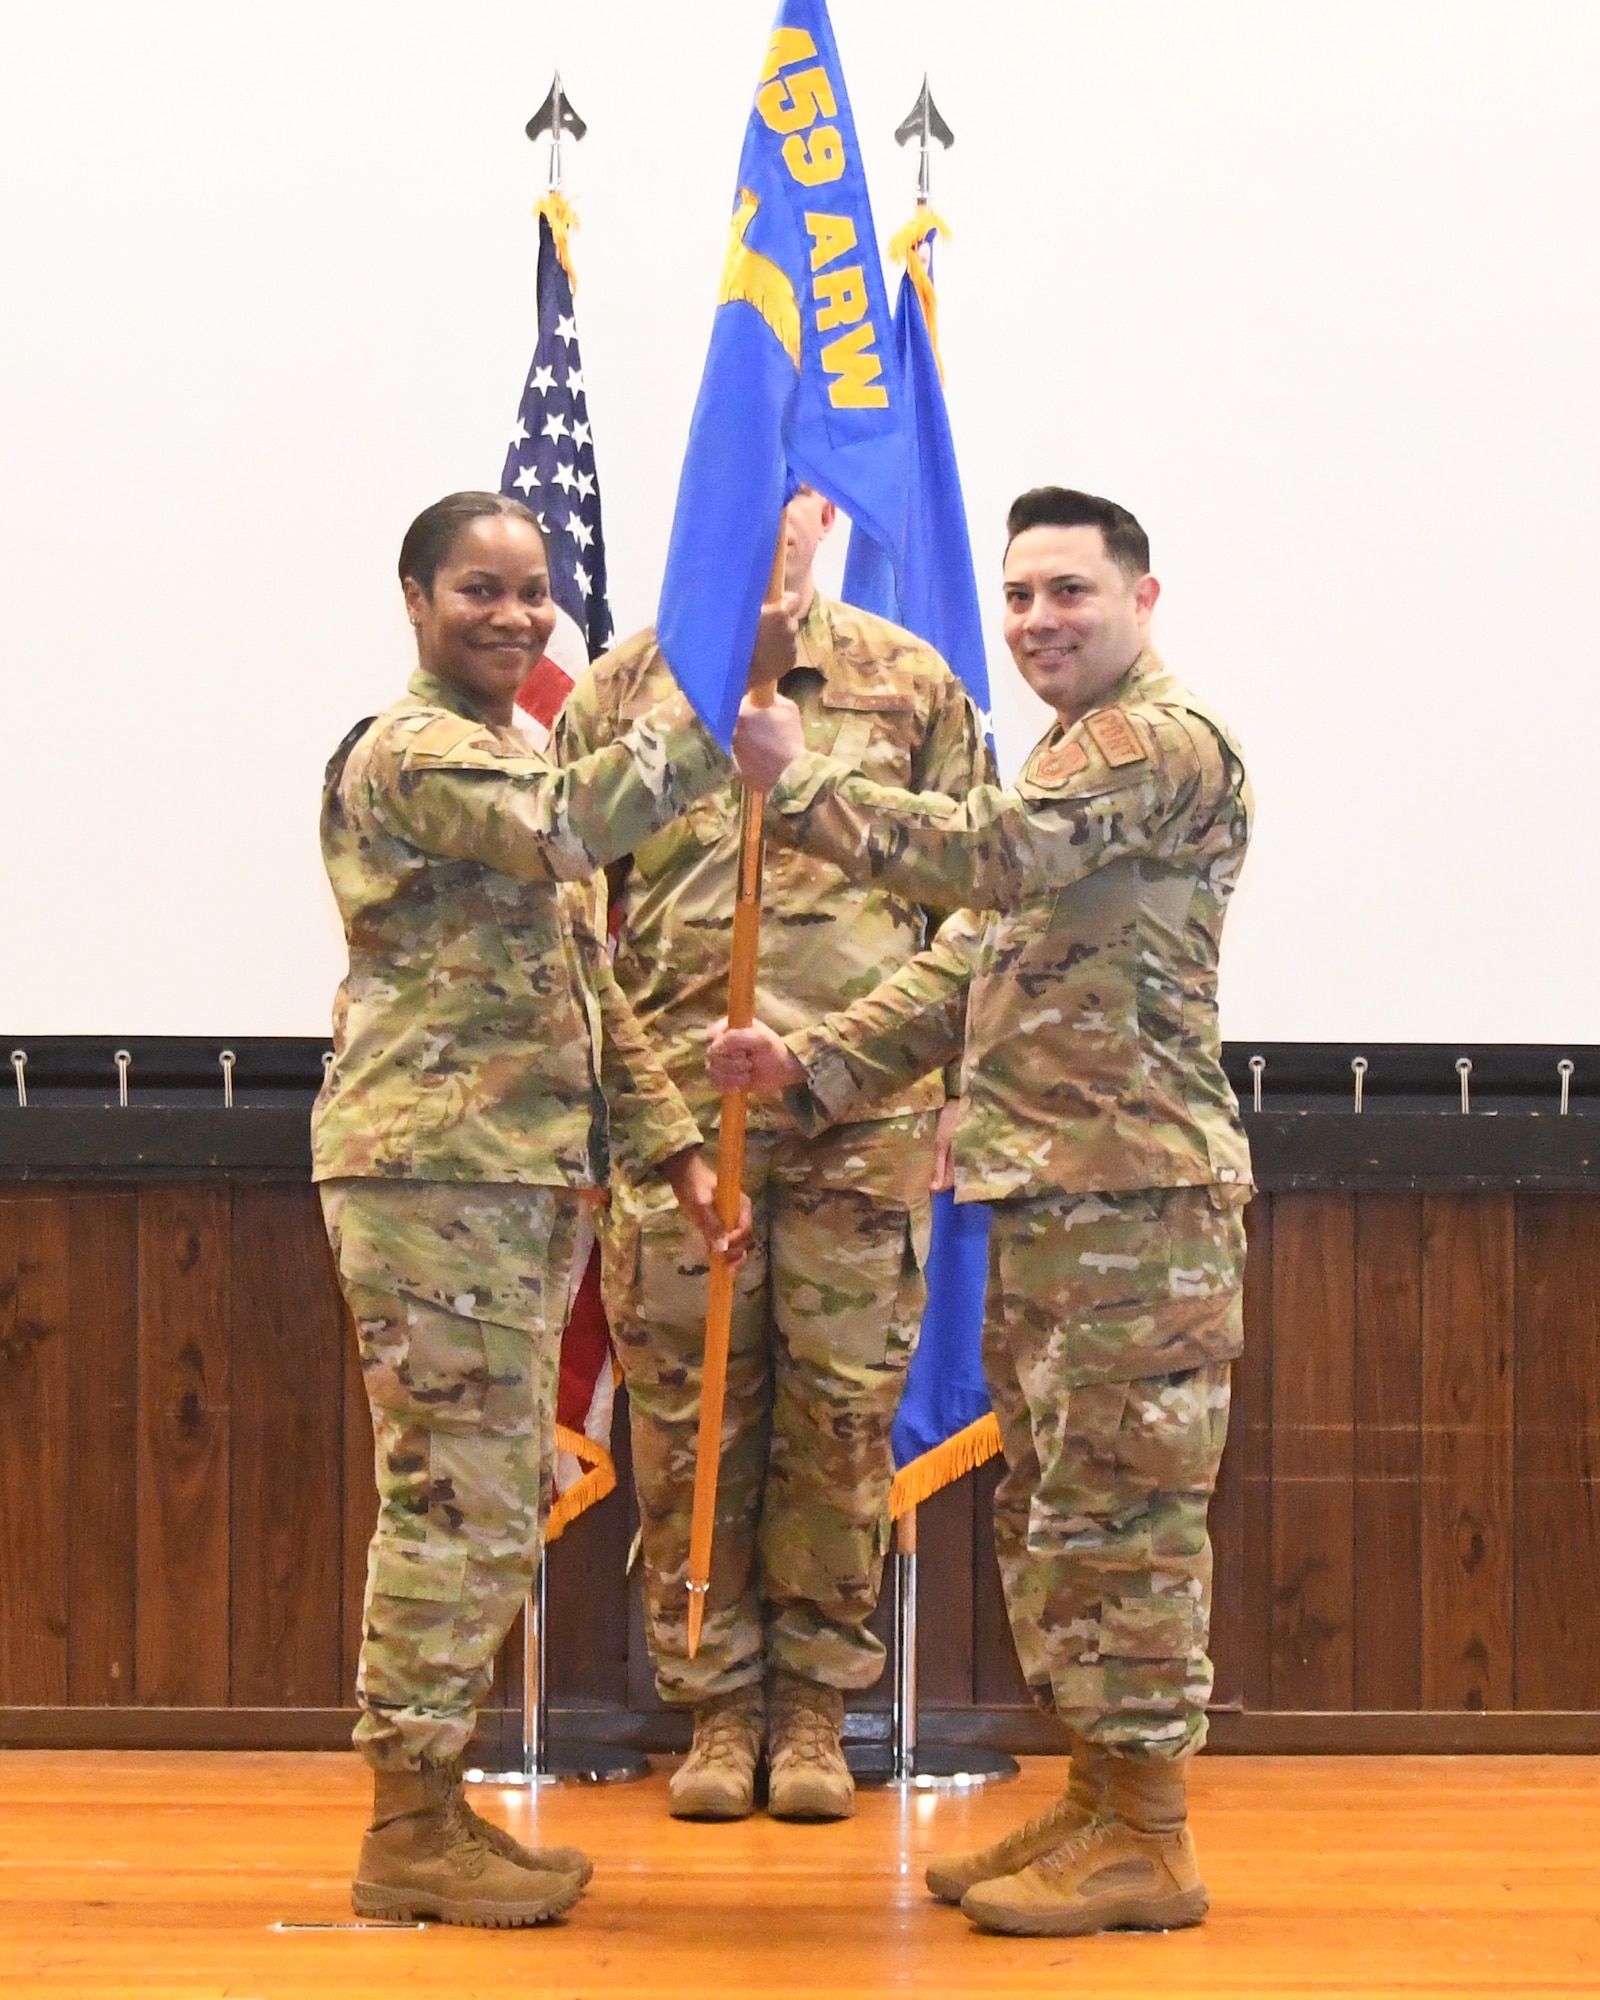 Lt. Col. Adrian Simental (right) assumes command of the 69th Aerial Port Squadron during a ceremony in the wing's auditorium on May 6, 2023. Col. Vianesa Vargas, 459th Mission Support Group Commander, was the presiding official. Simental was previously a member of the 514th Air Mobility Wing at Joint Base McGuire-Dix-Lakehurst, N.J.